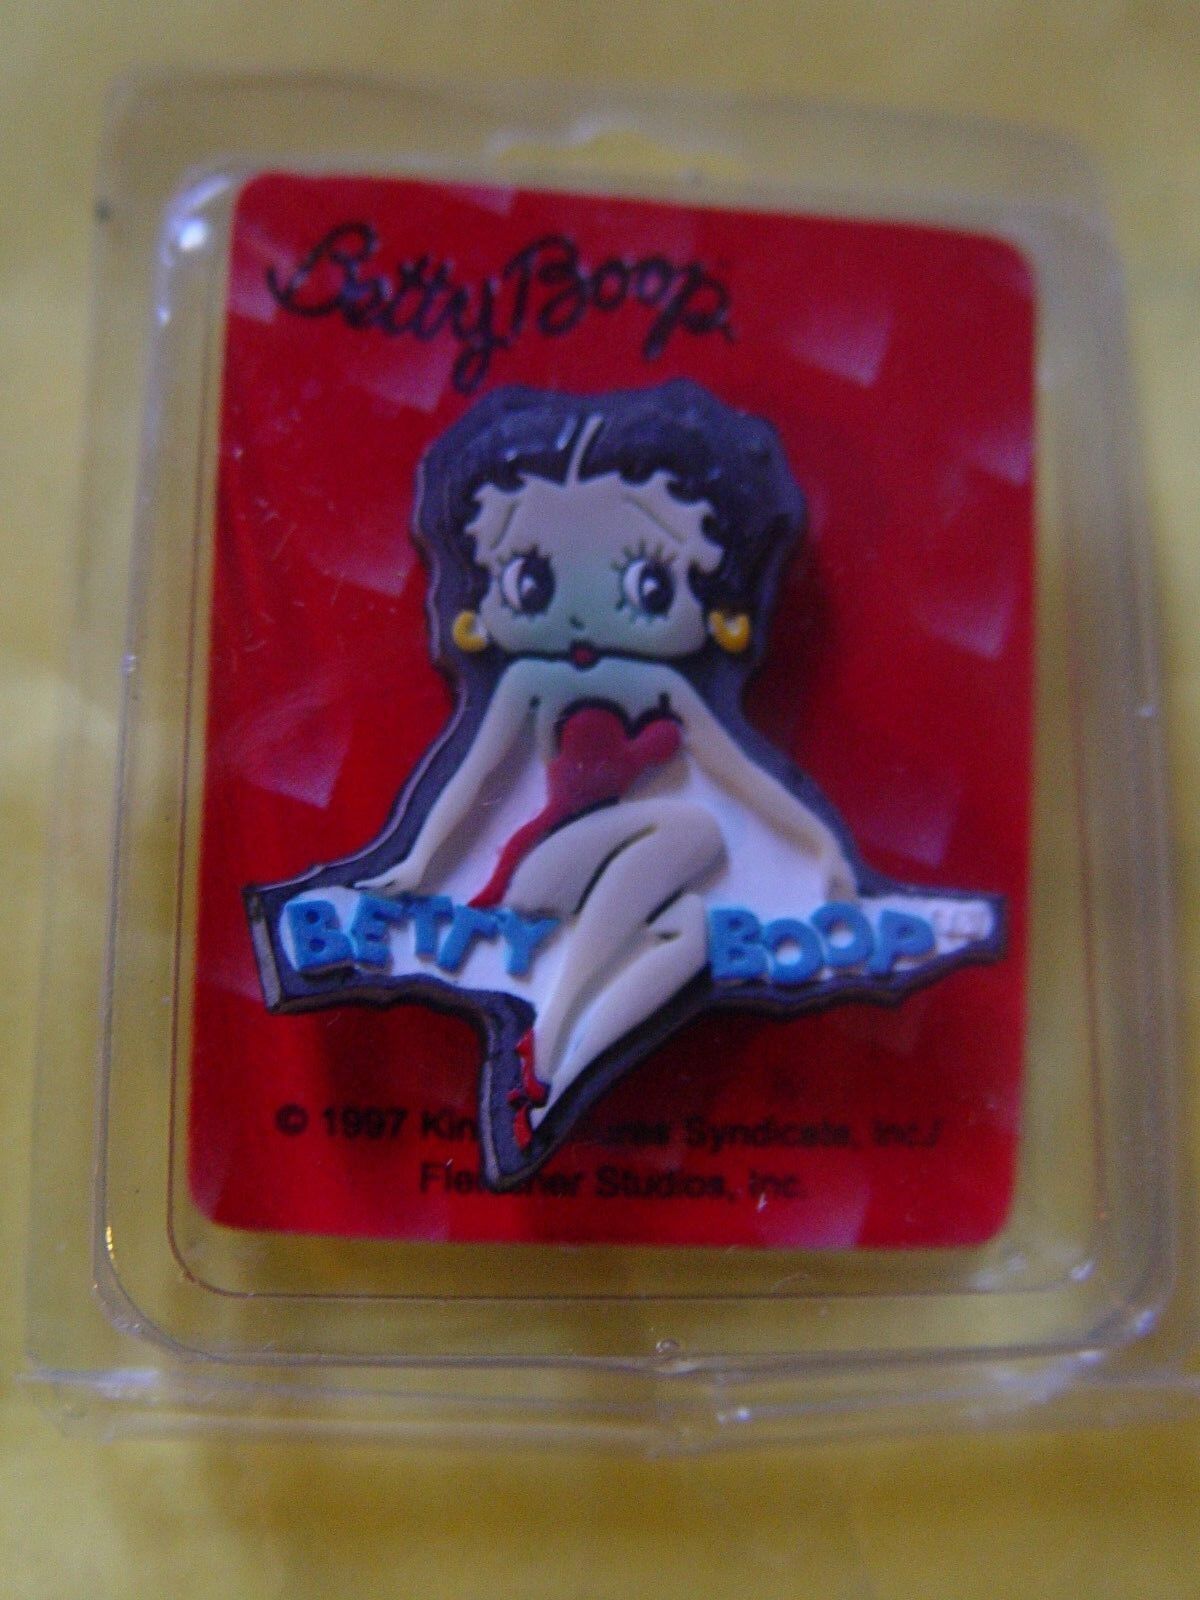 10 IN LOT BETTY BOOP PIN INDIVIDUALY WRAPED SOLD RETAIL AT HALLMARK STORES, NEW. Betty Boop